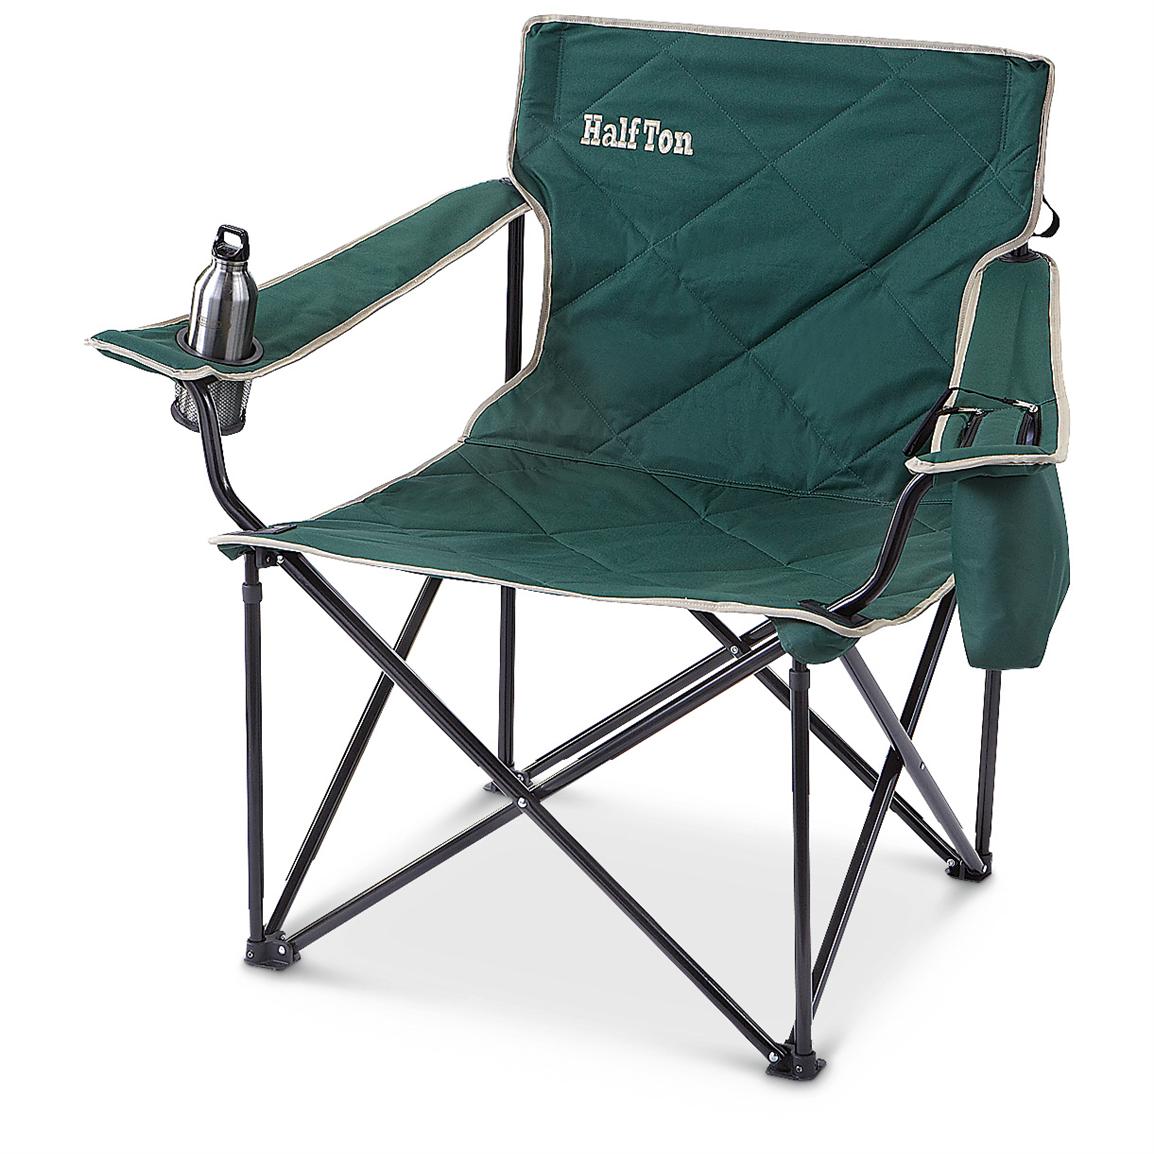 Fold Up Sports Chair Deals, 56% OFF | www.hcb.cat